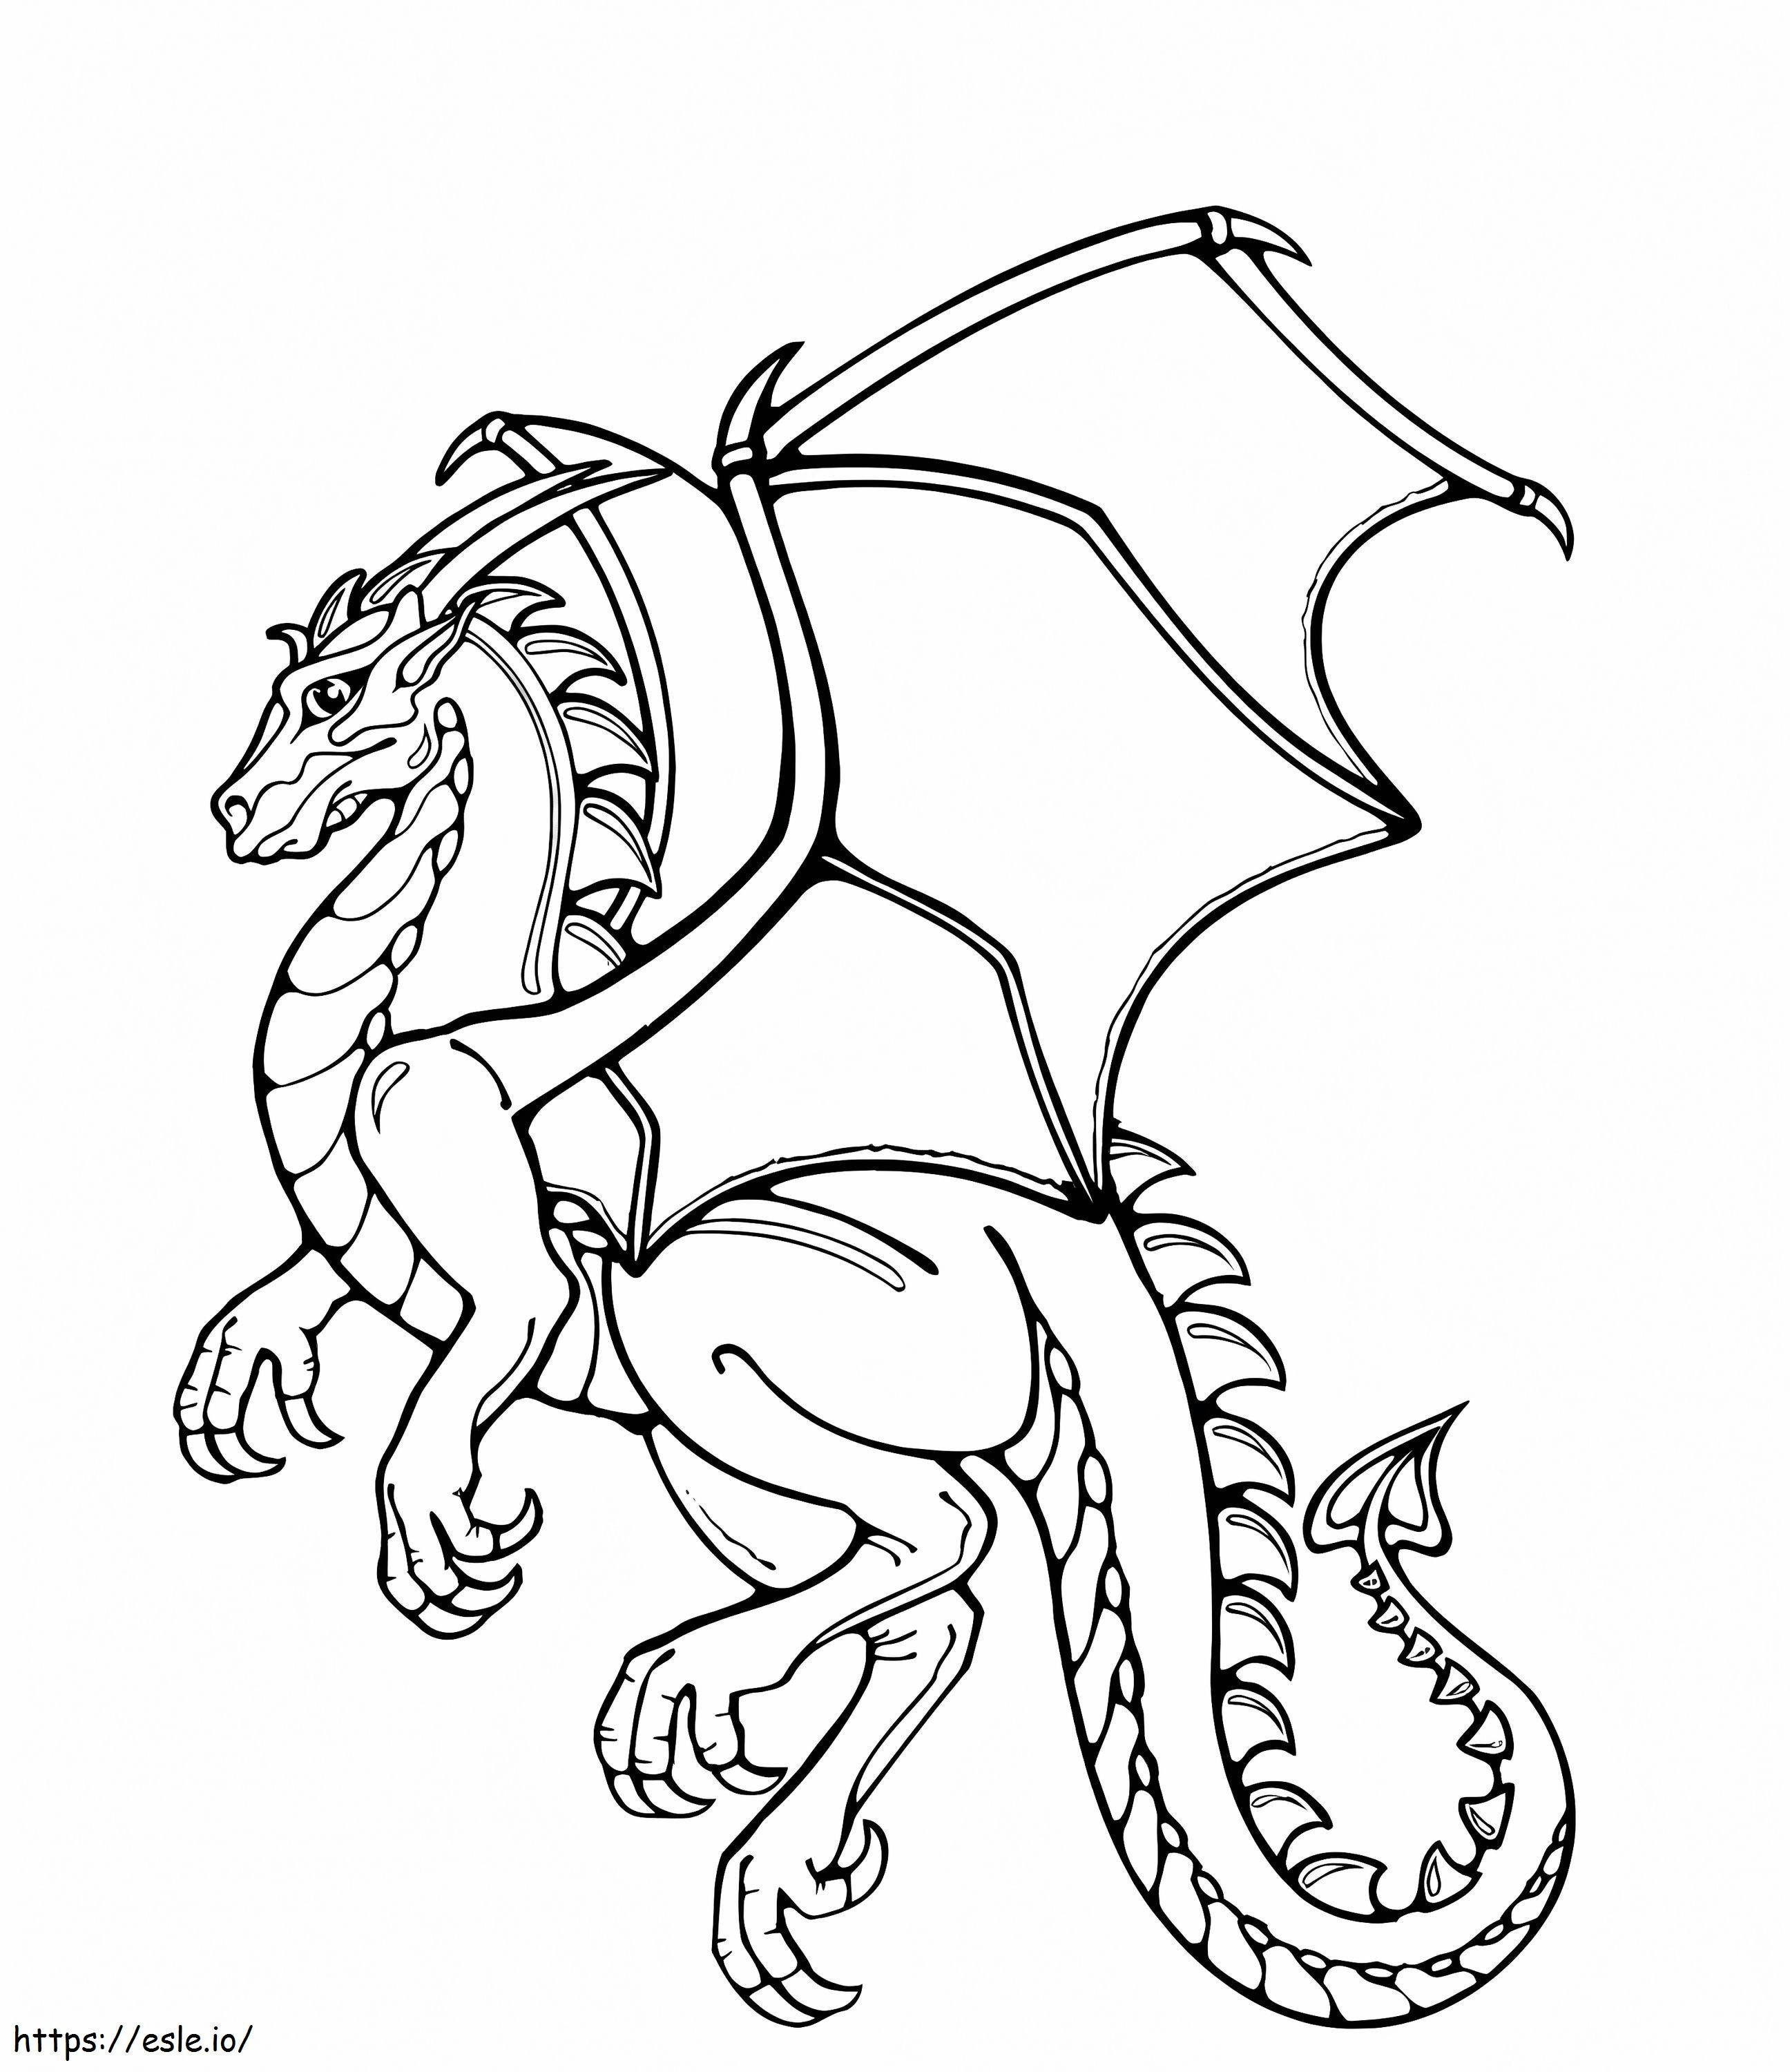 Amazing Dragon coloring page